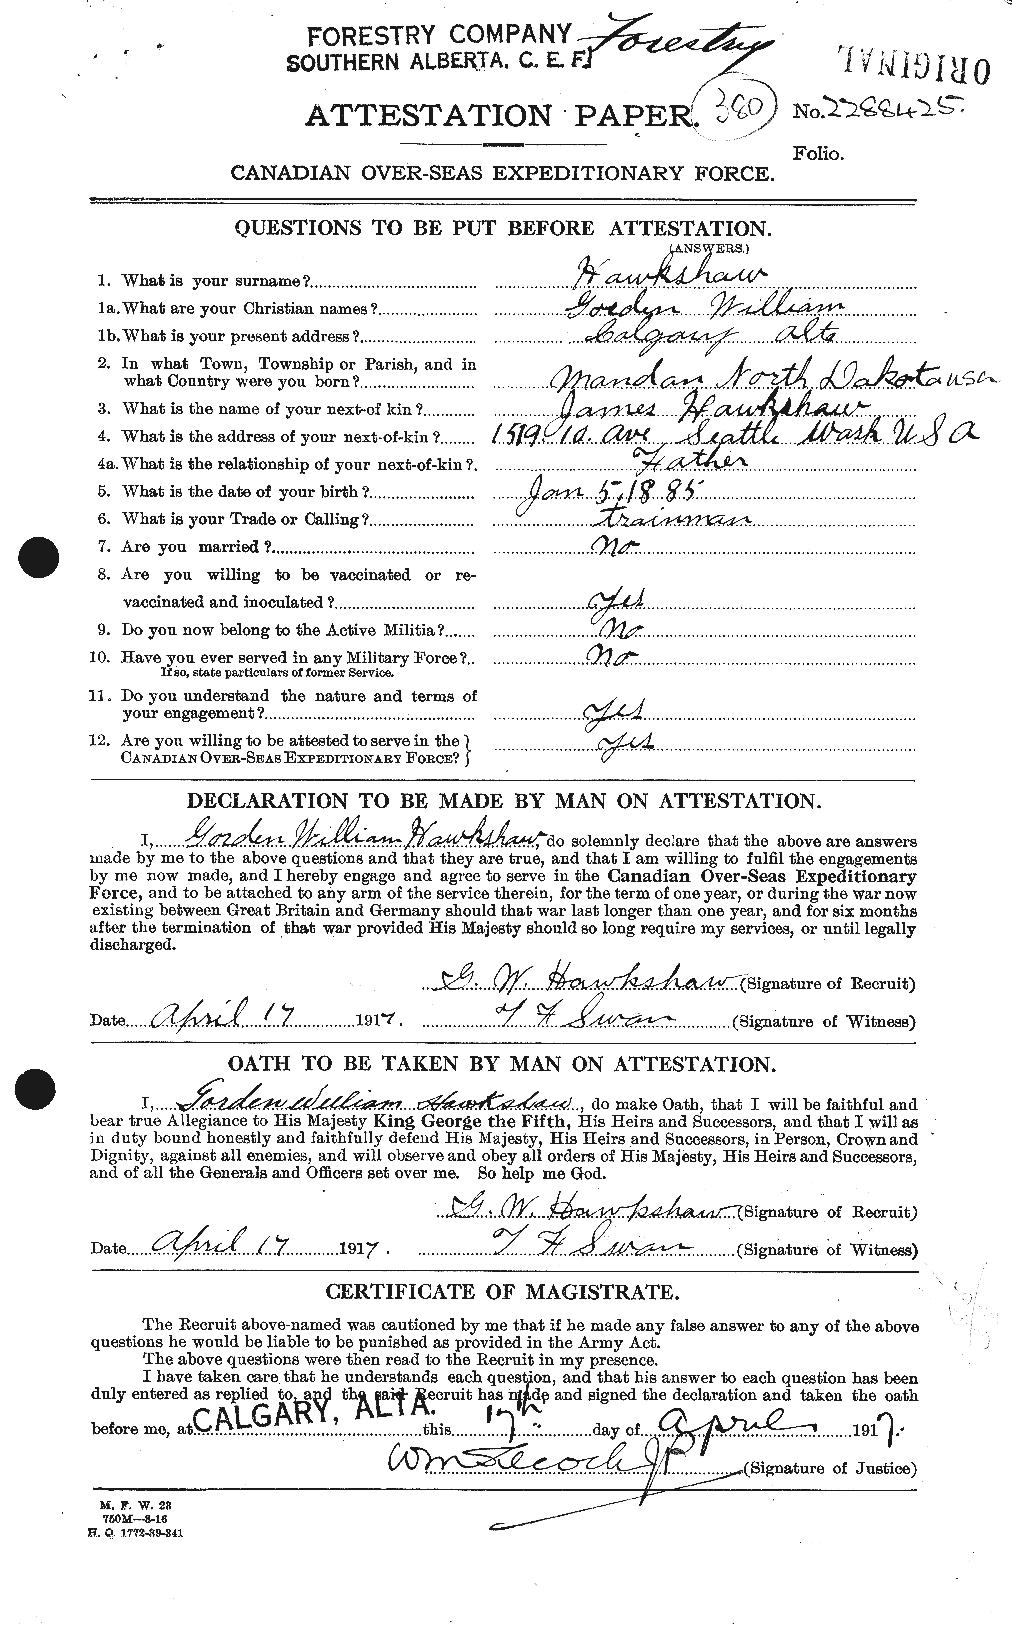 Personnel Records of the First World War - CEF 385690a